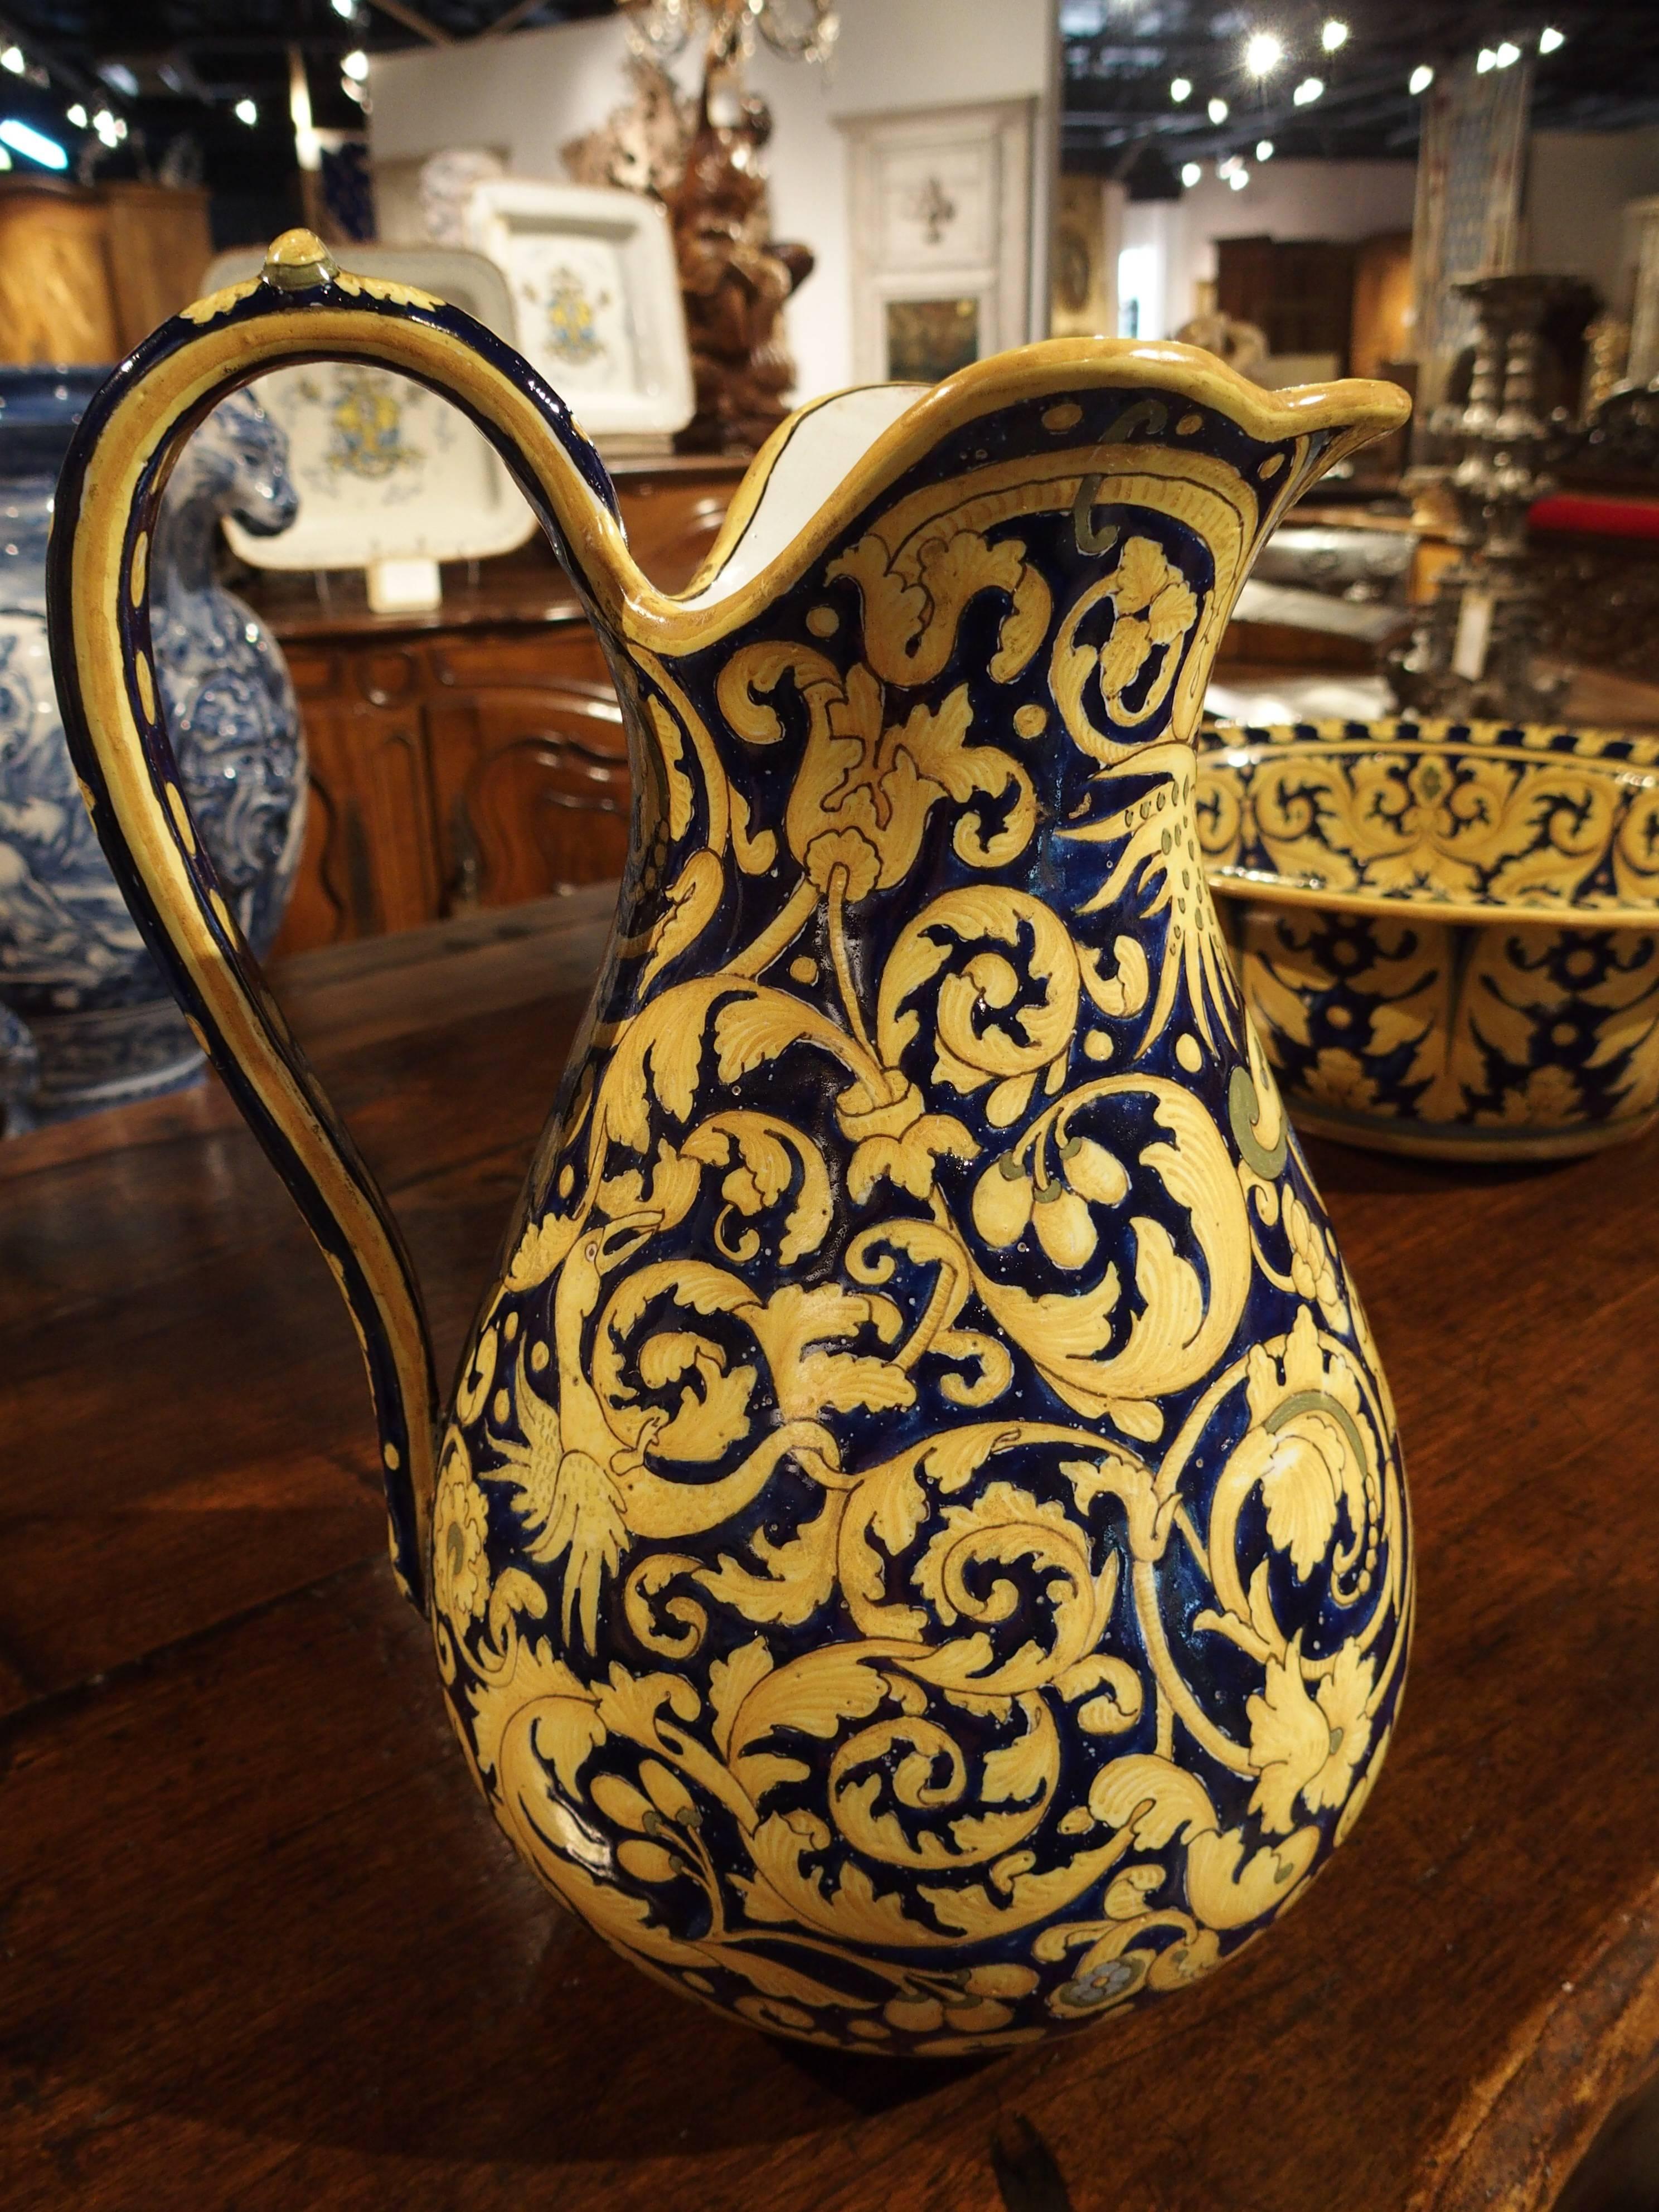 Faience Antique Nevers Pitcher and Bowl from France, circa 1885